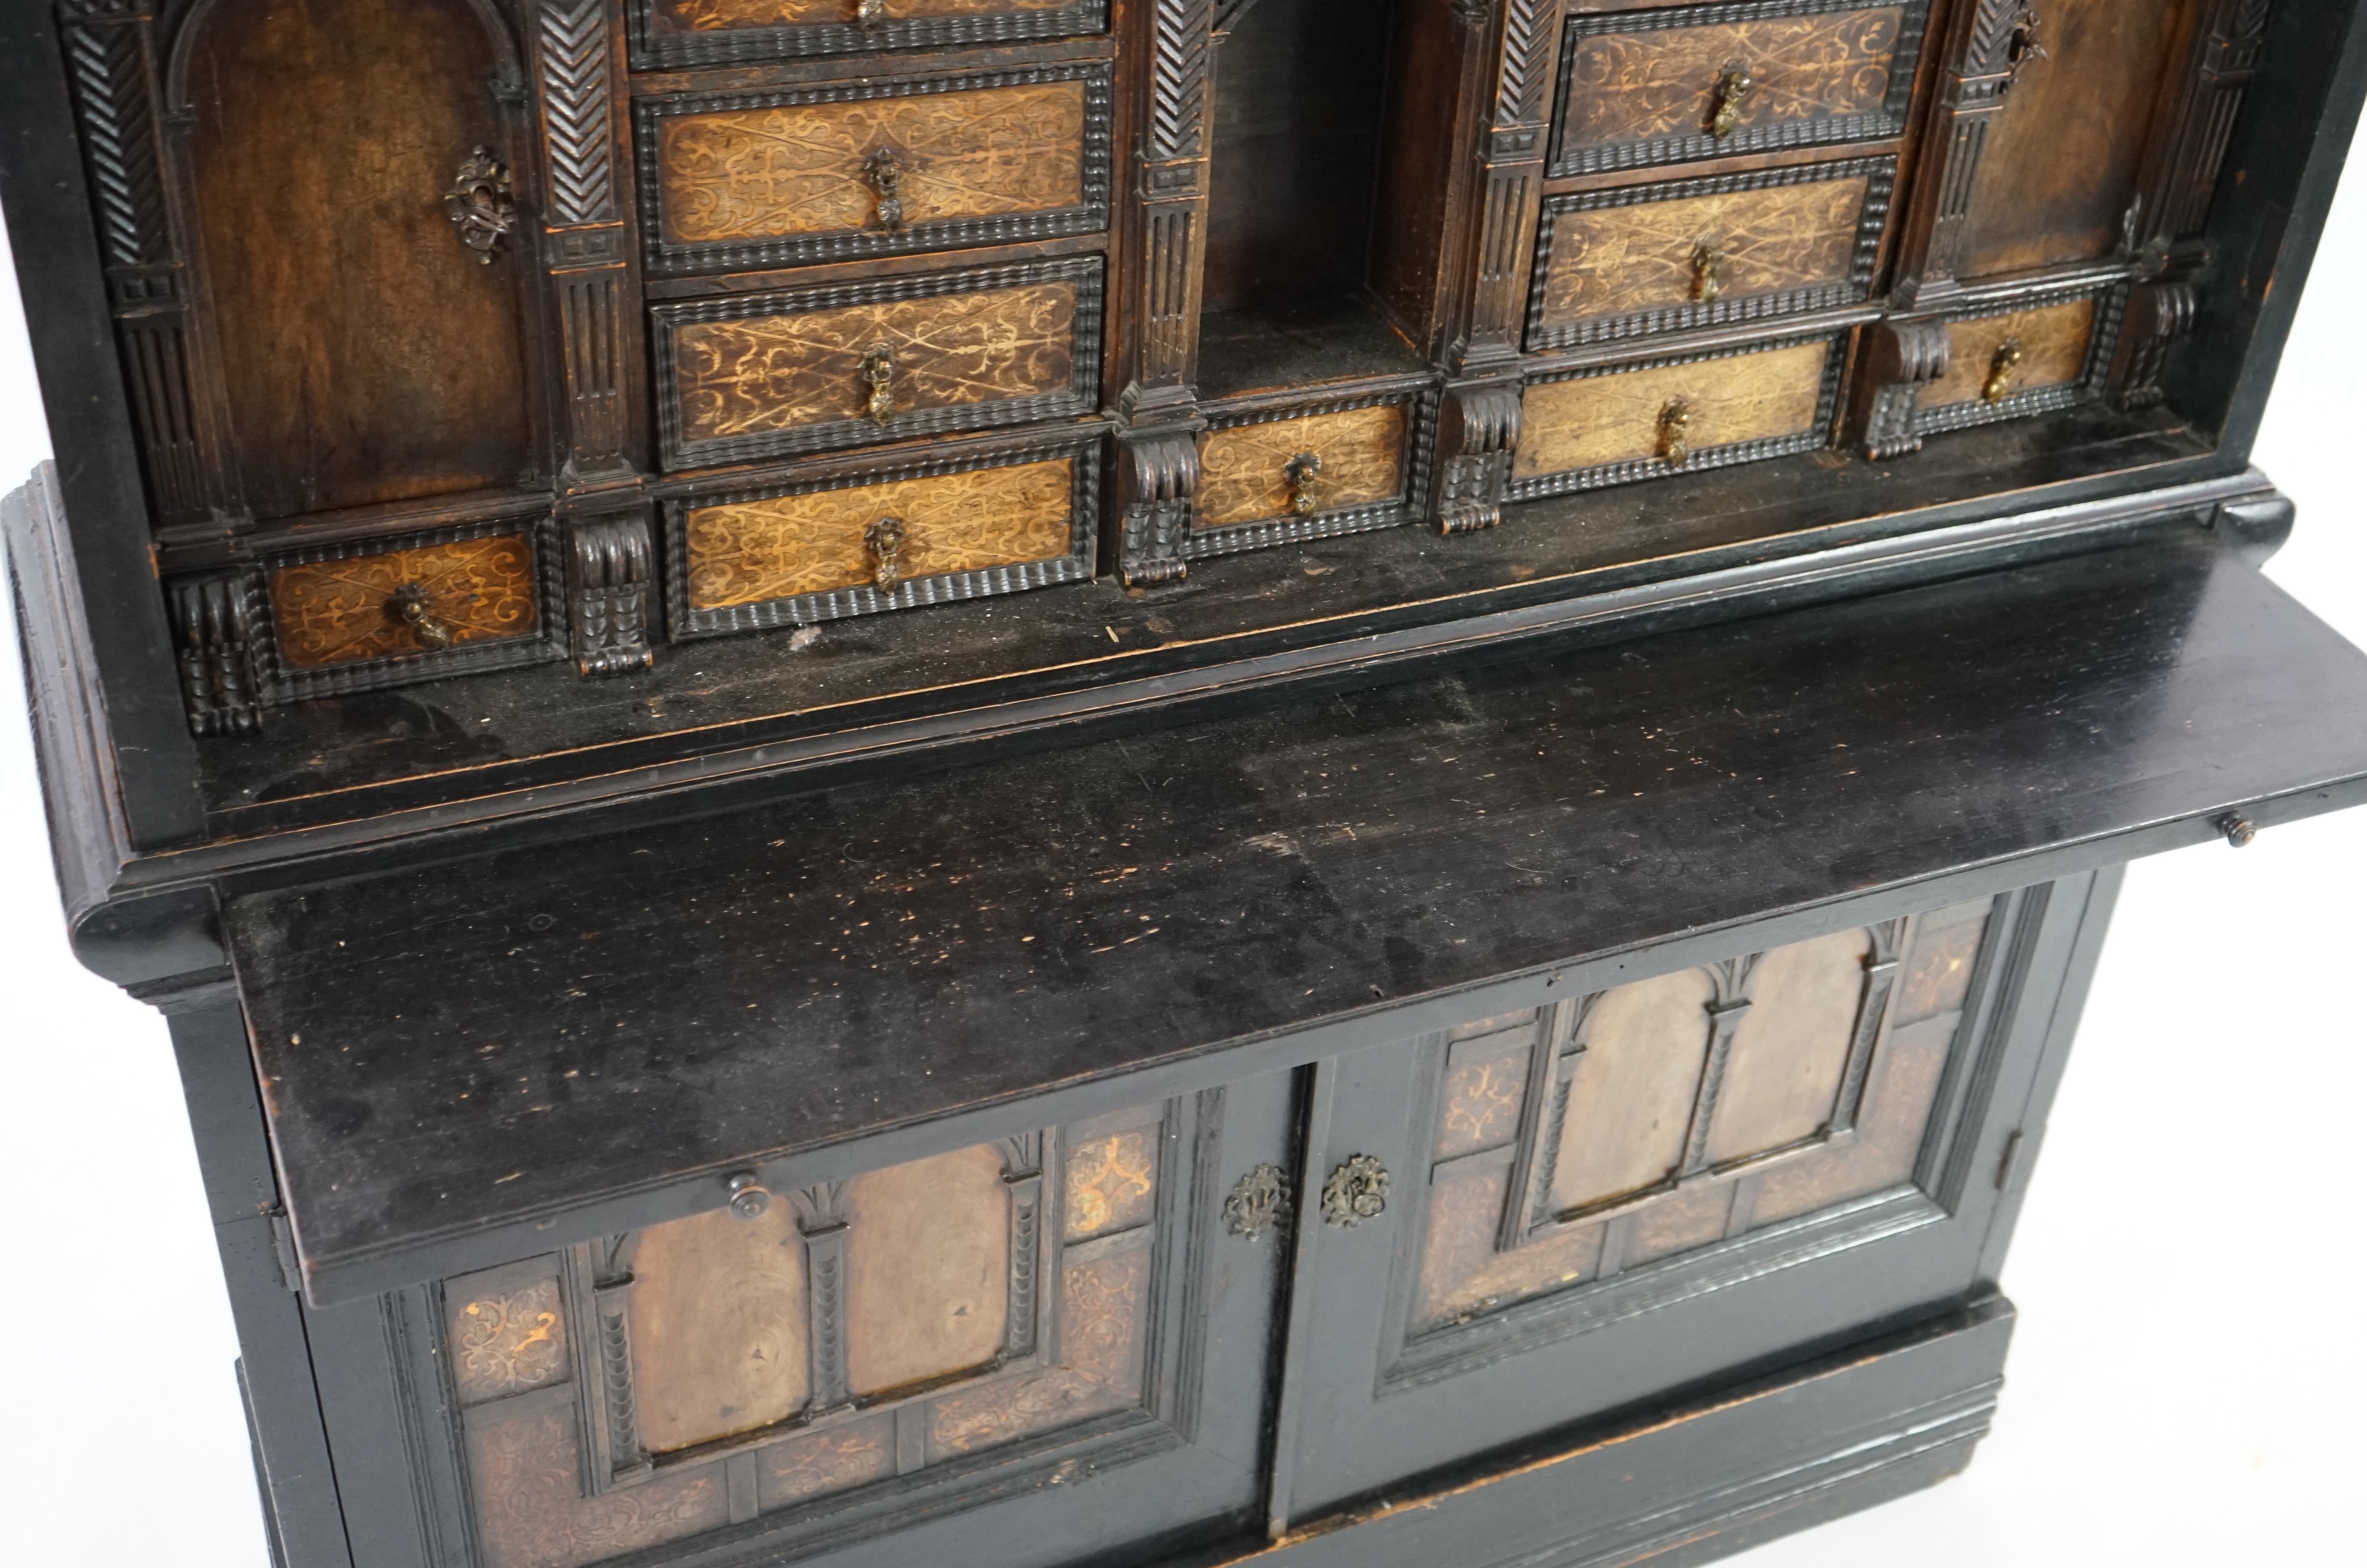 An 18th century and later Dutch walnut ebonised and marquetry inlaid collector's cabinet on stand